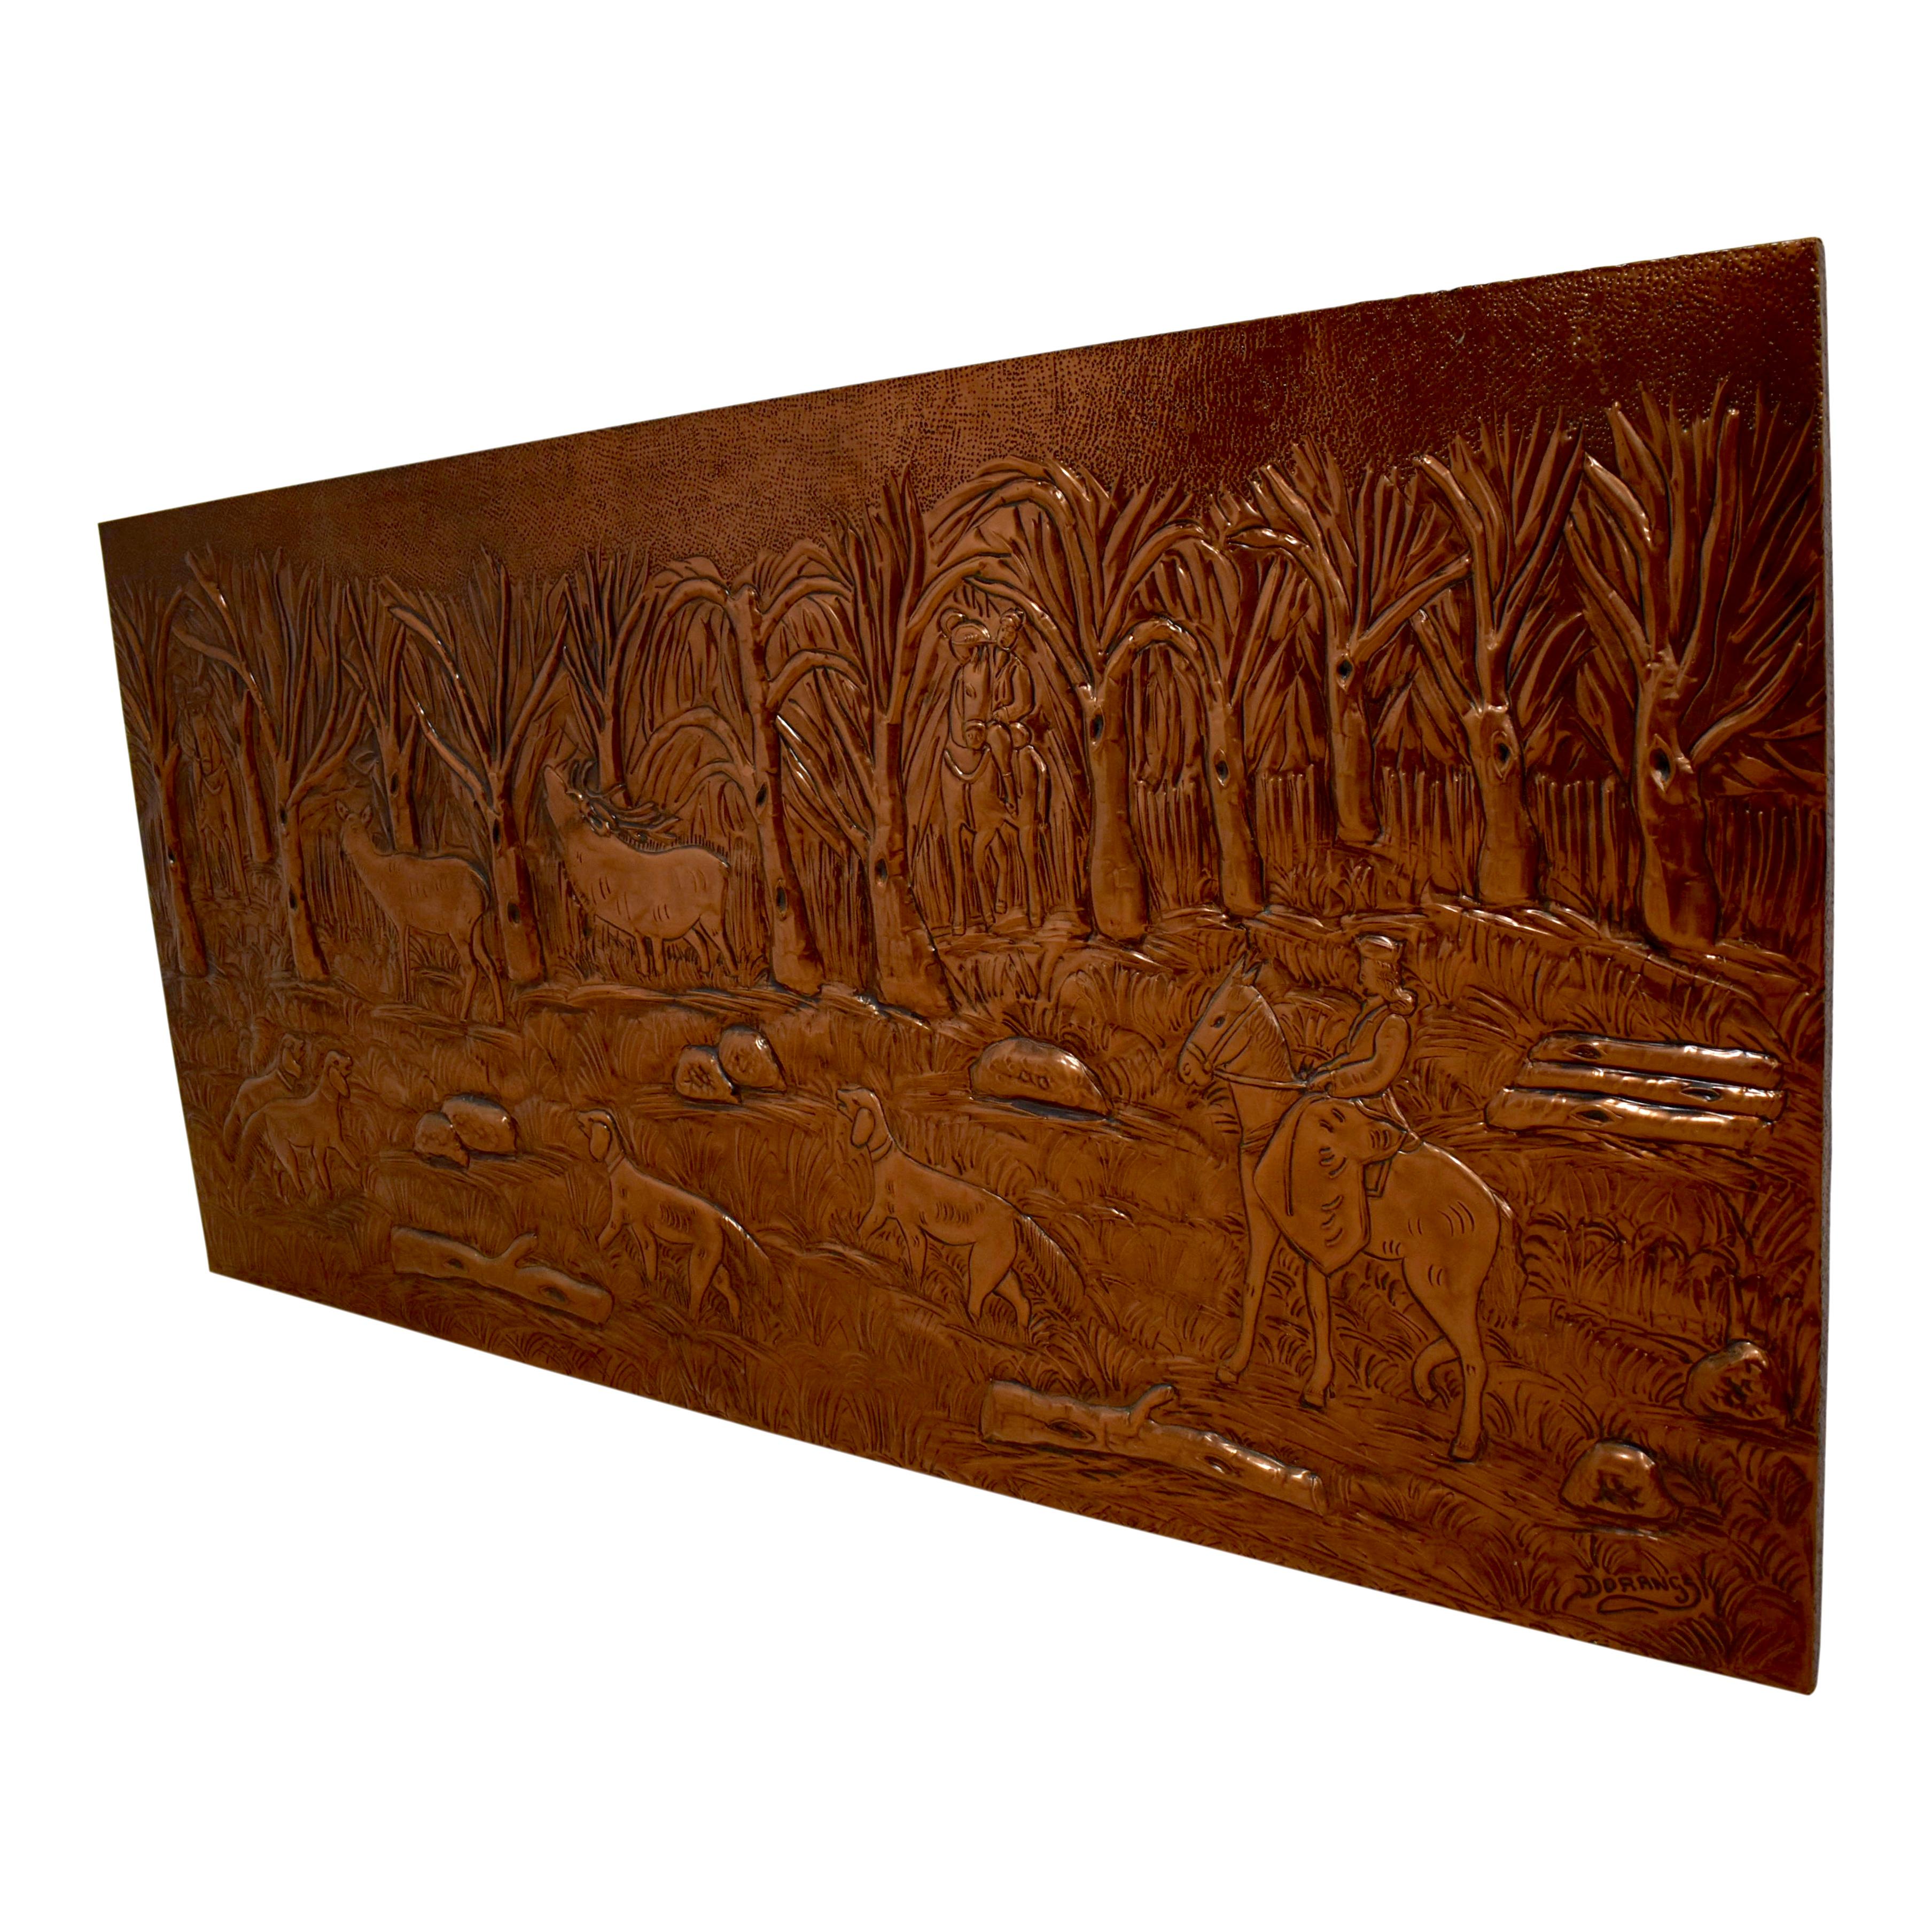 European Substantial Decorative Copper Panel with Hunt Scene For Sale